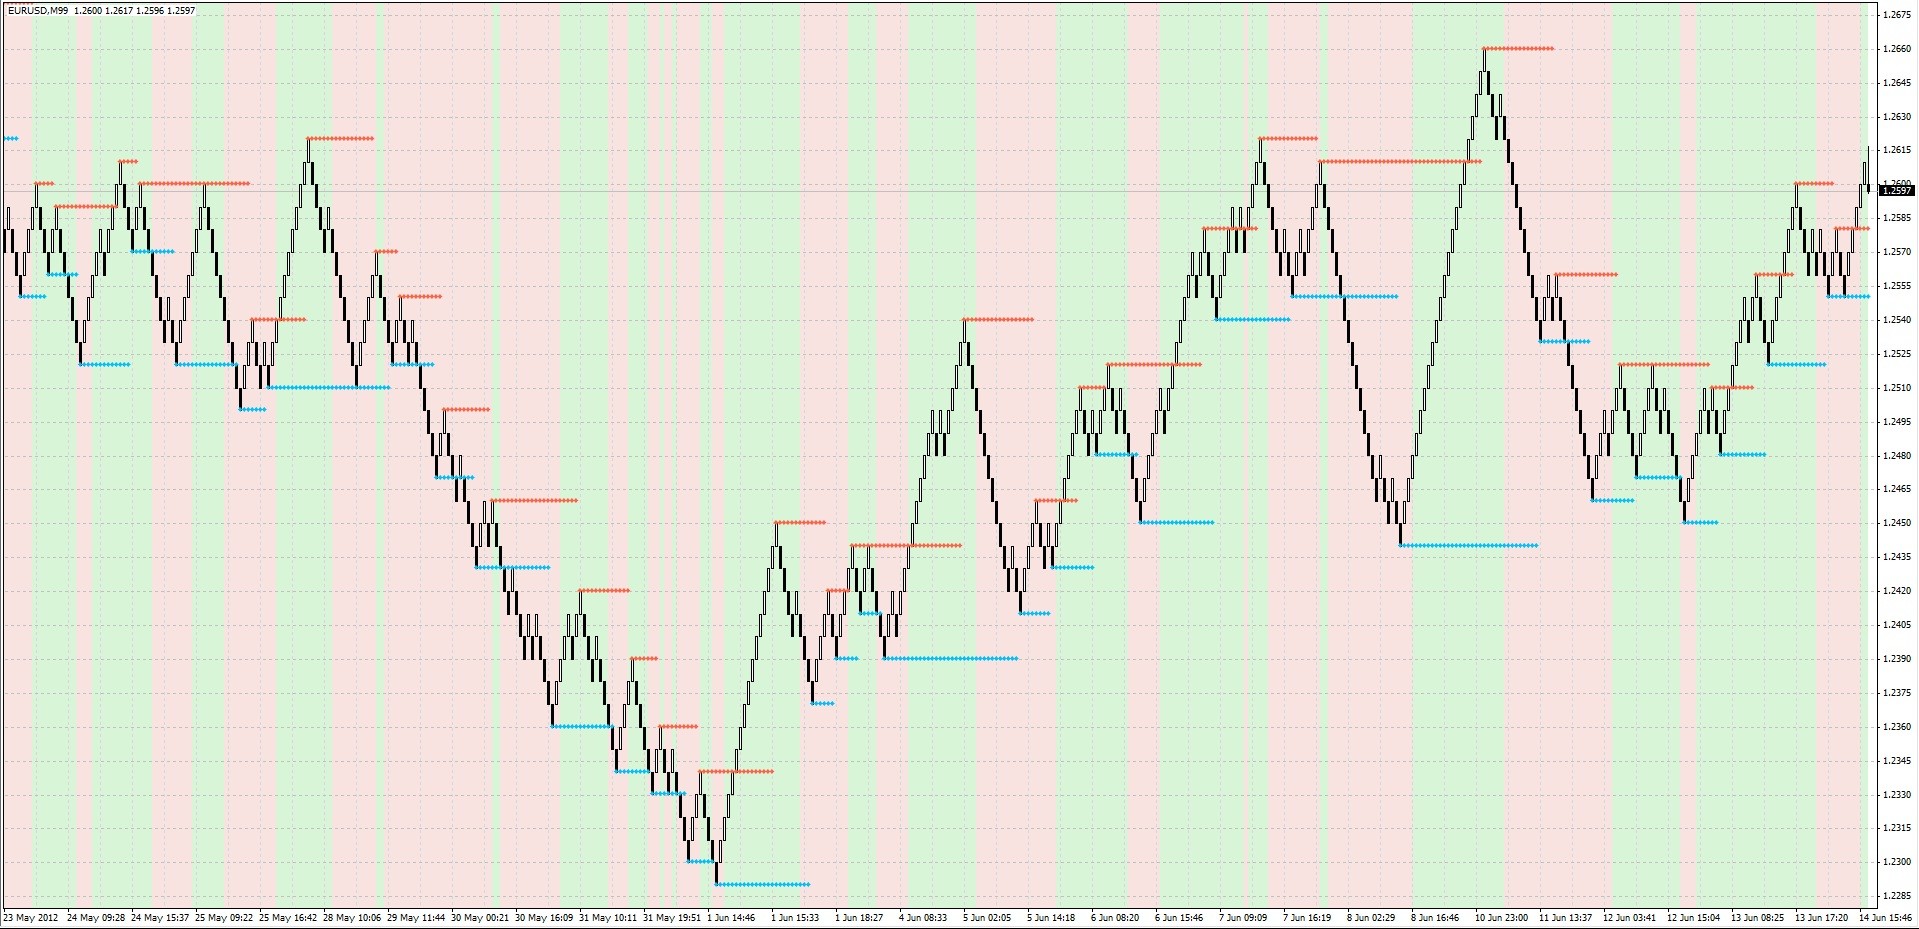 Automated Trading With Renko Charts